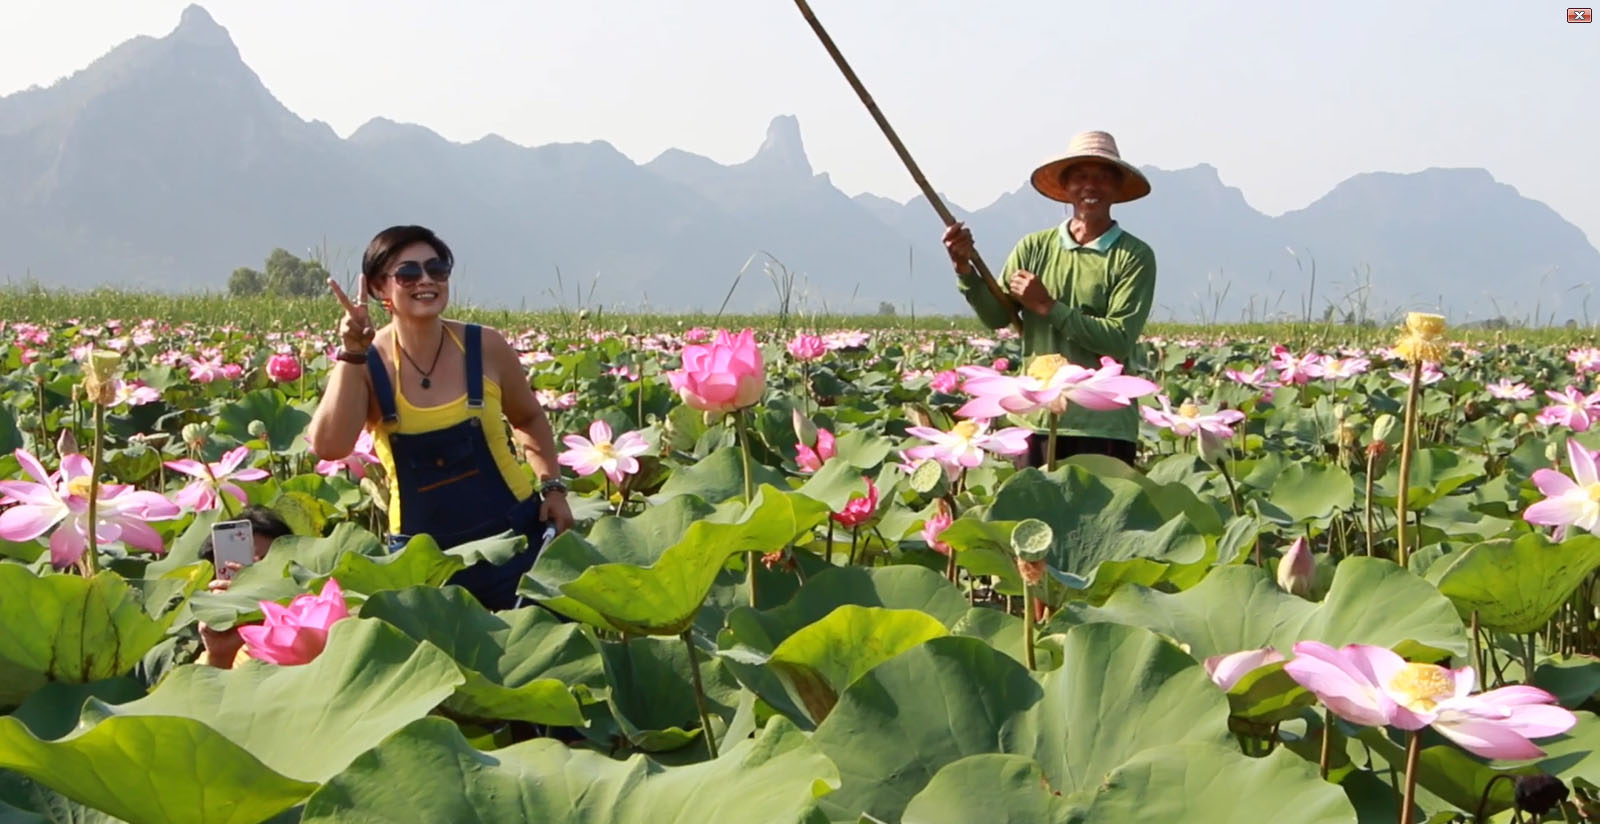 Tourist Saengdao Todsanit poses in the field of sacred lotuses Wednesday in Khao Sam Roi Yot National Park while her tour guide smiles. Image: Khaoso English